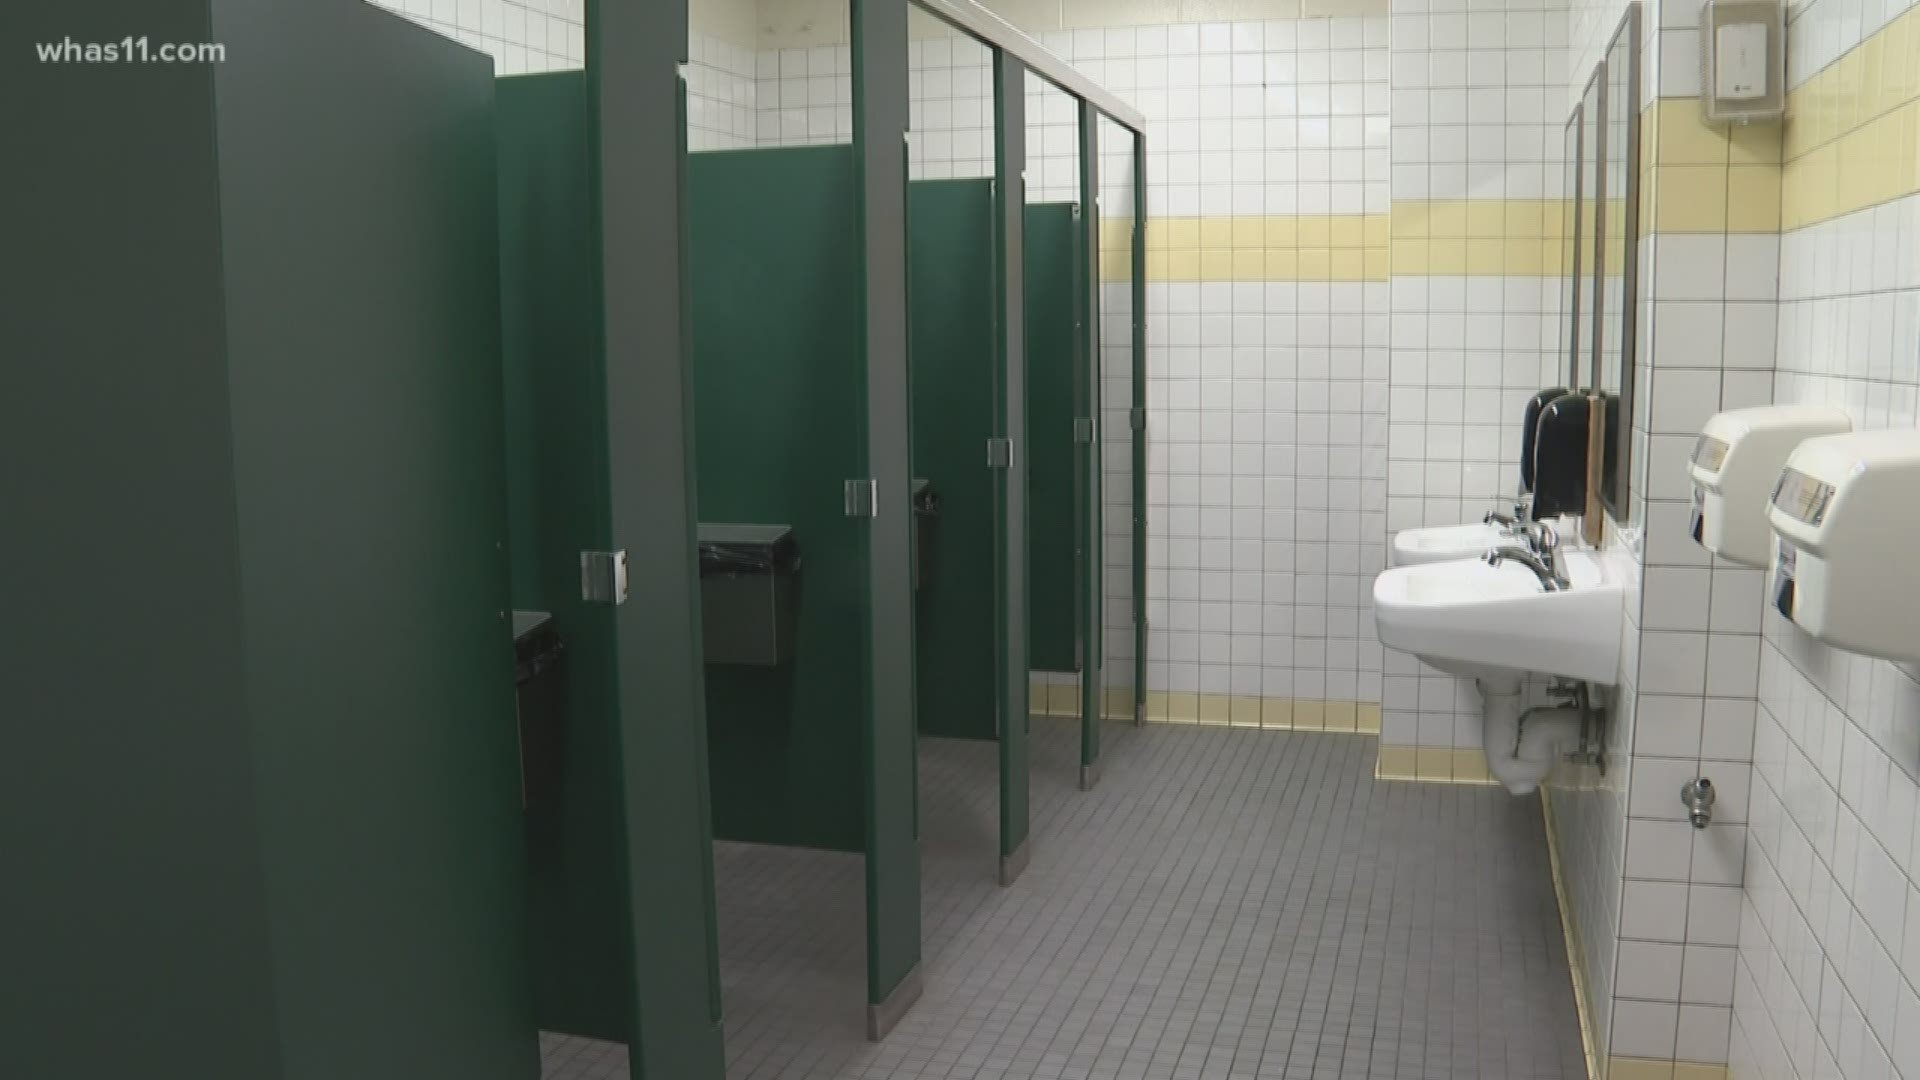 The school implemented a policy at the beginning of last school year to lock hallway bathrooms during class periods.